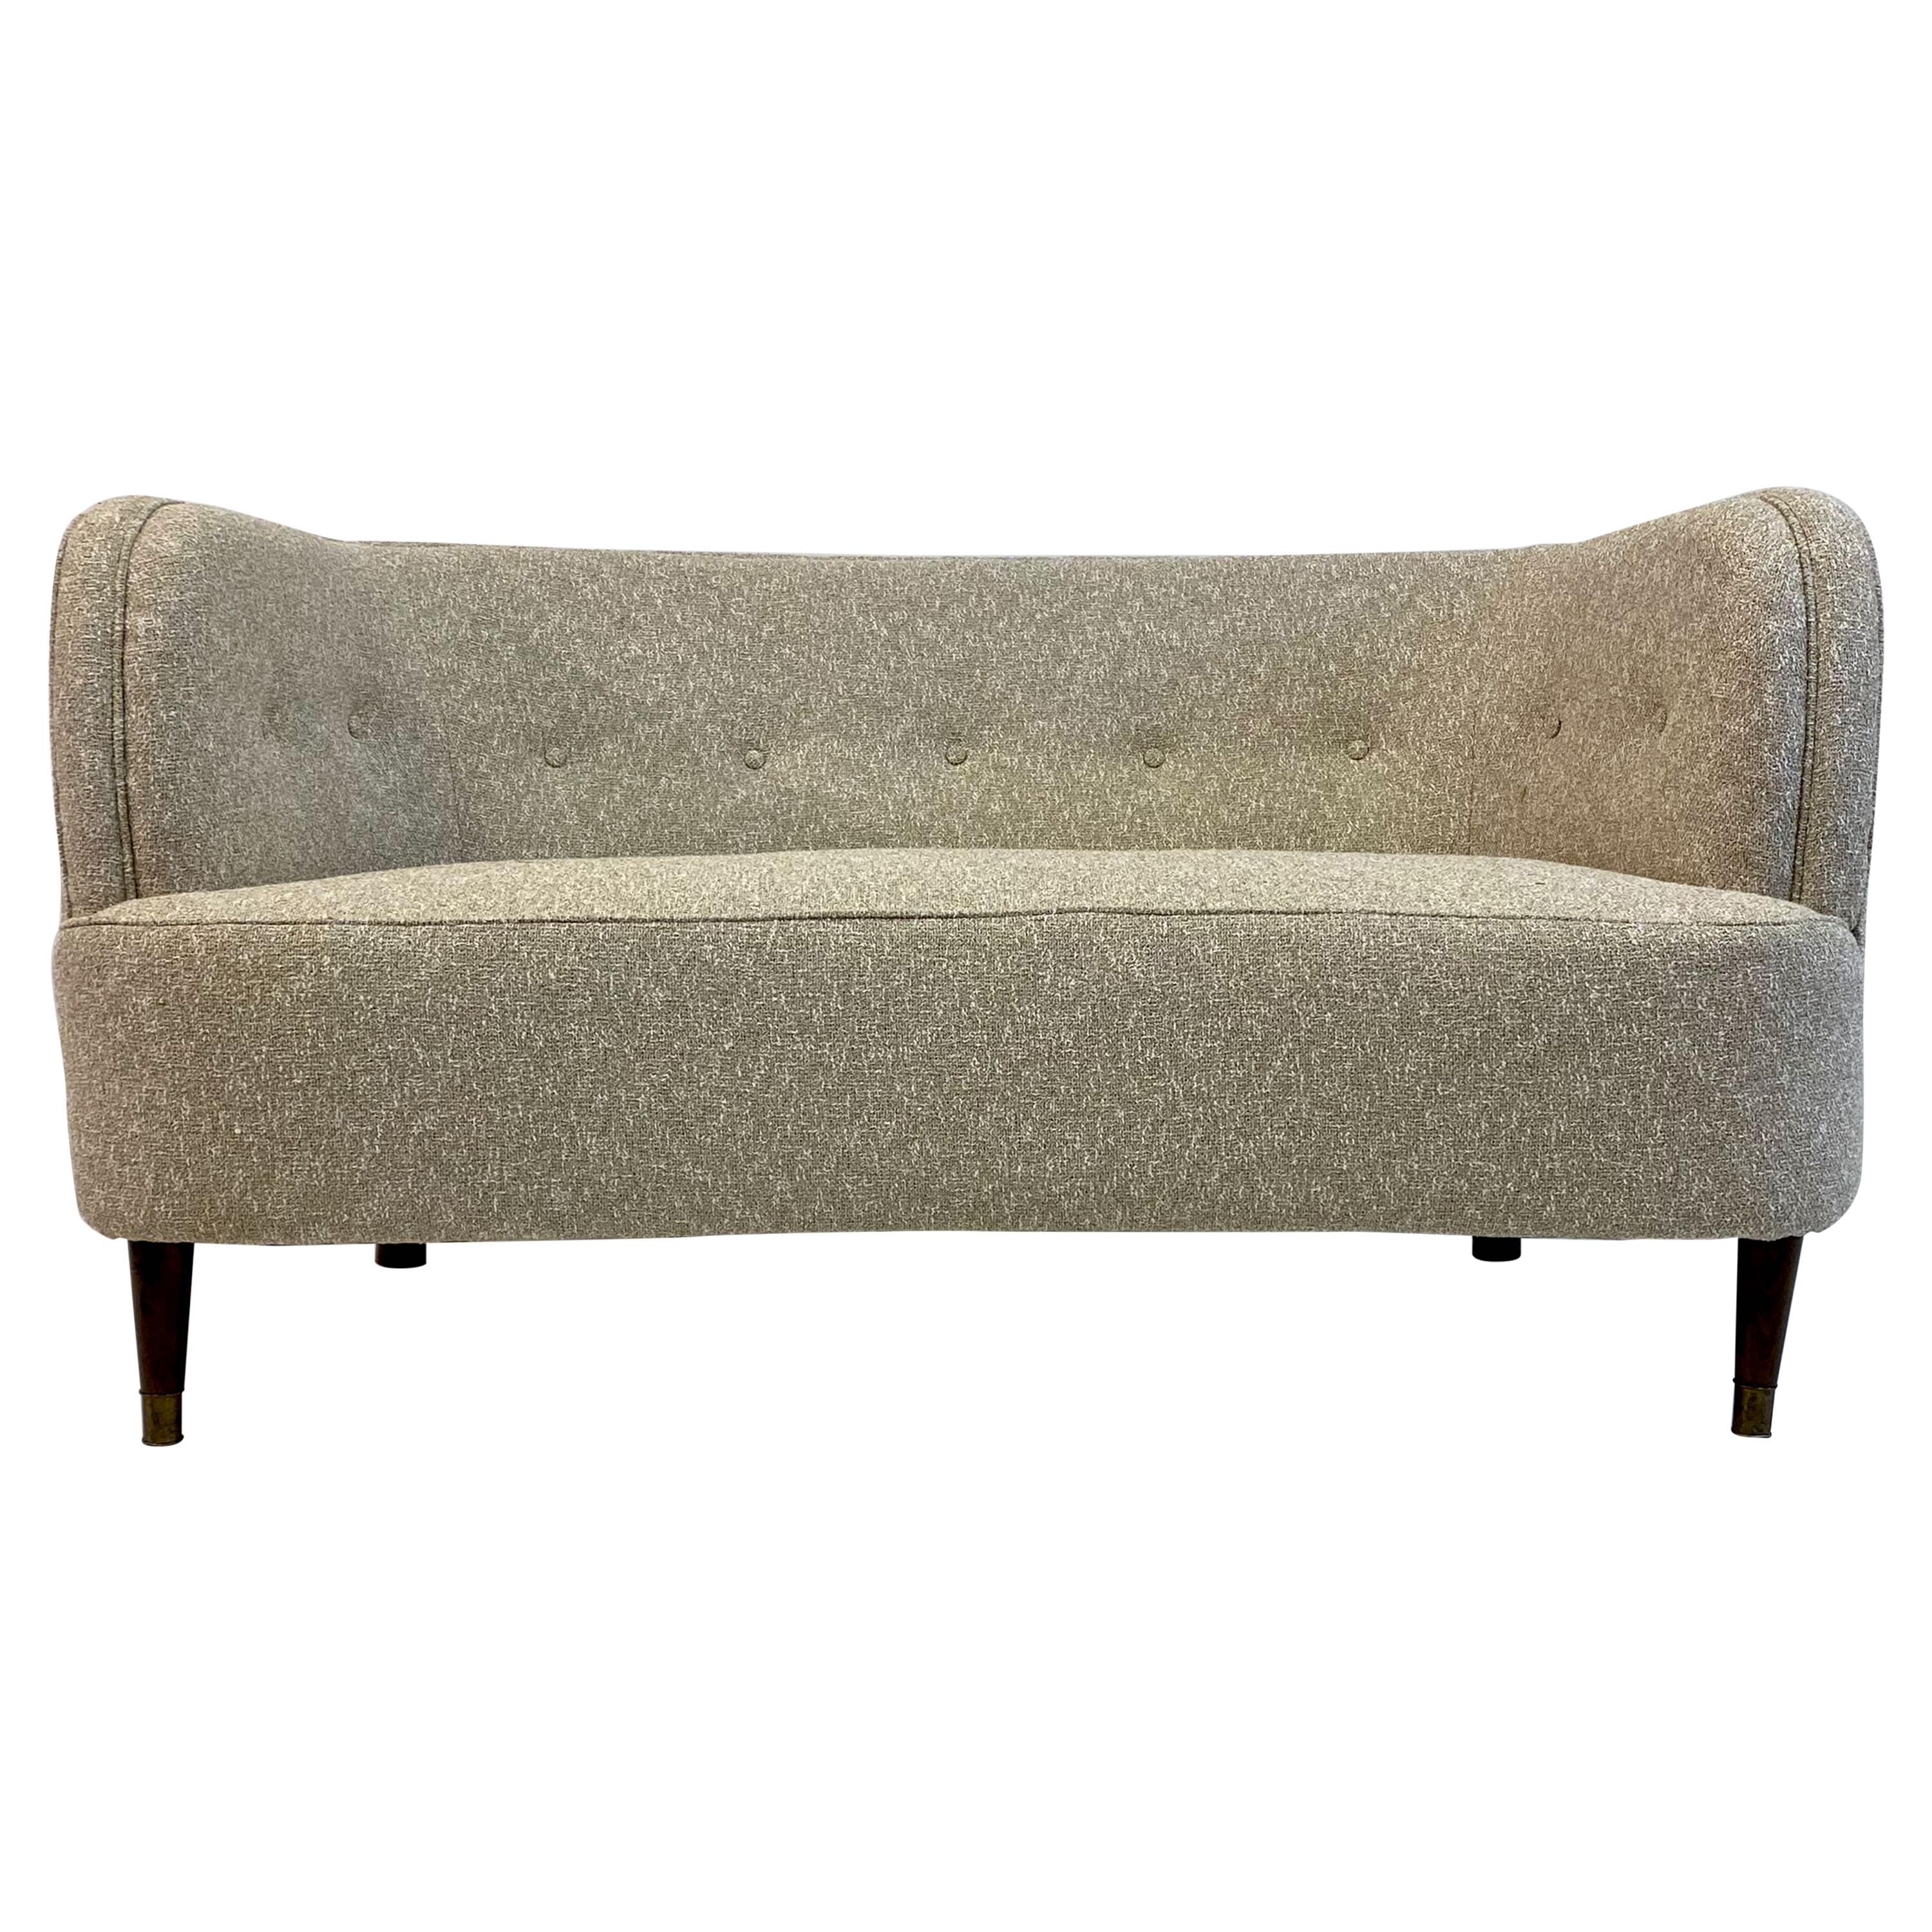 Small Curved 1940s Danish Two-Seat Sofa in Neutral Lelièvre Fabric